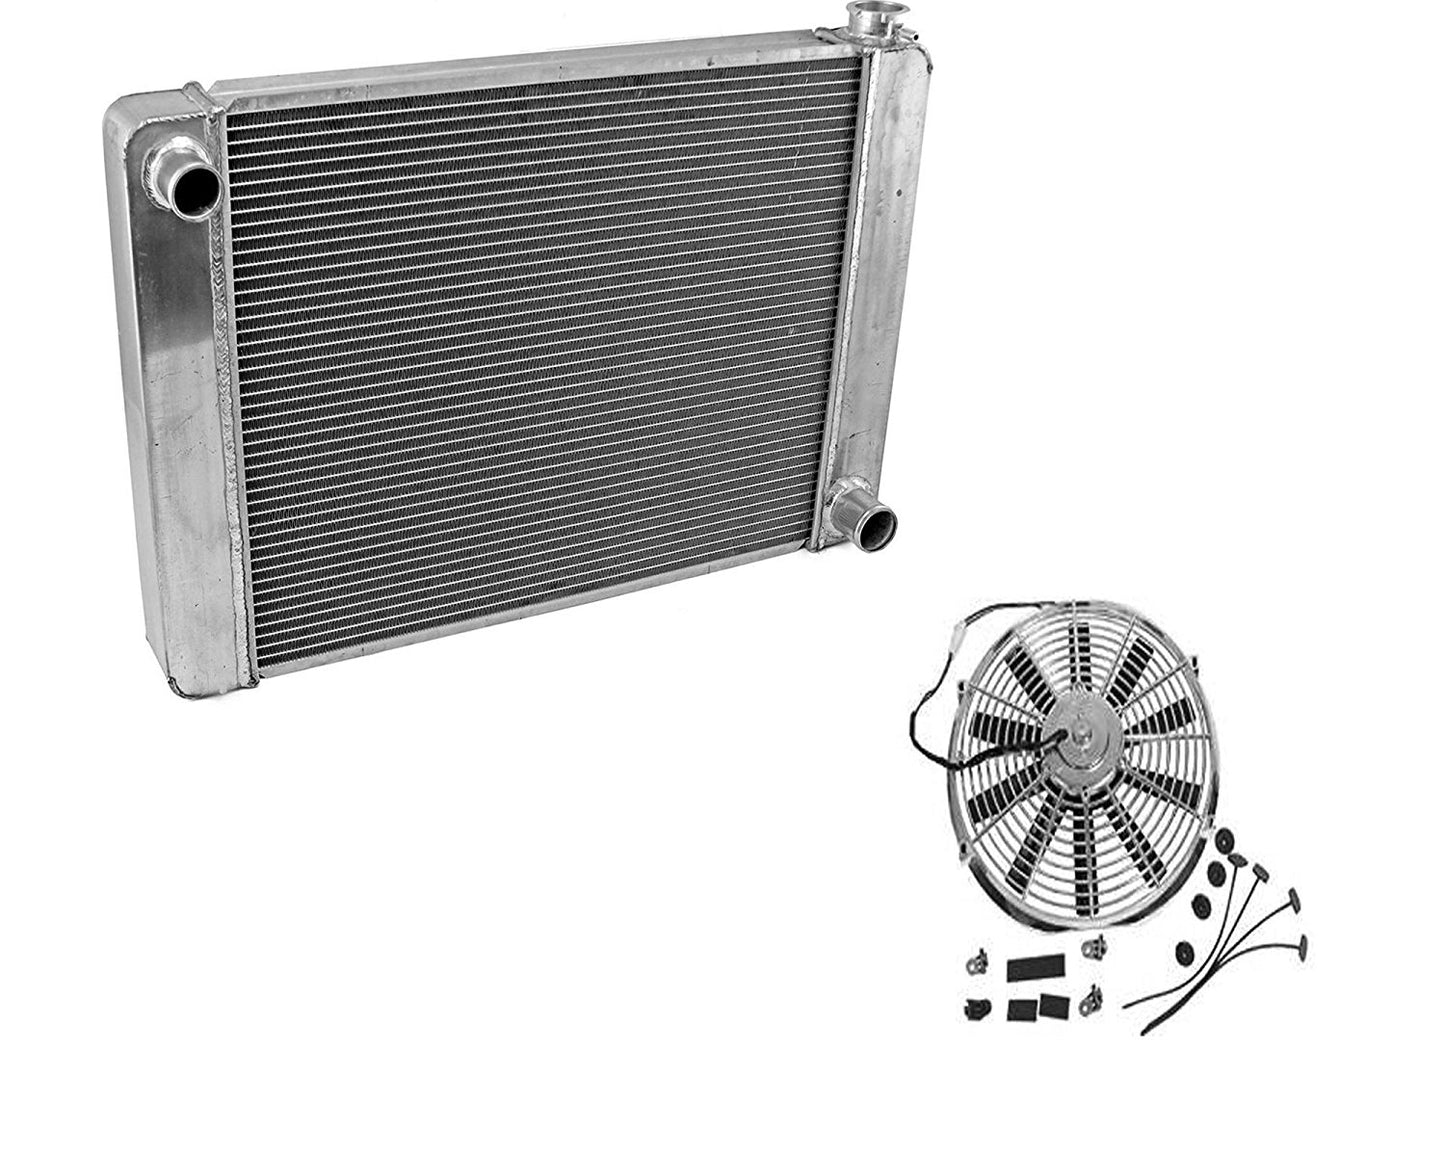 Fabricated Aluminum Radiator 30" x 19" x3" Overall For SBC BBC Chevy GM & Electric Chrome 10" straight blade cooling radiator fan